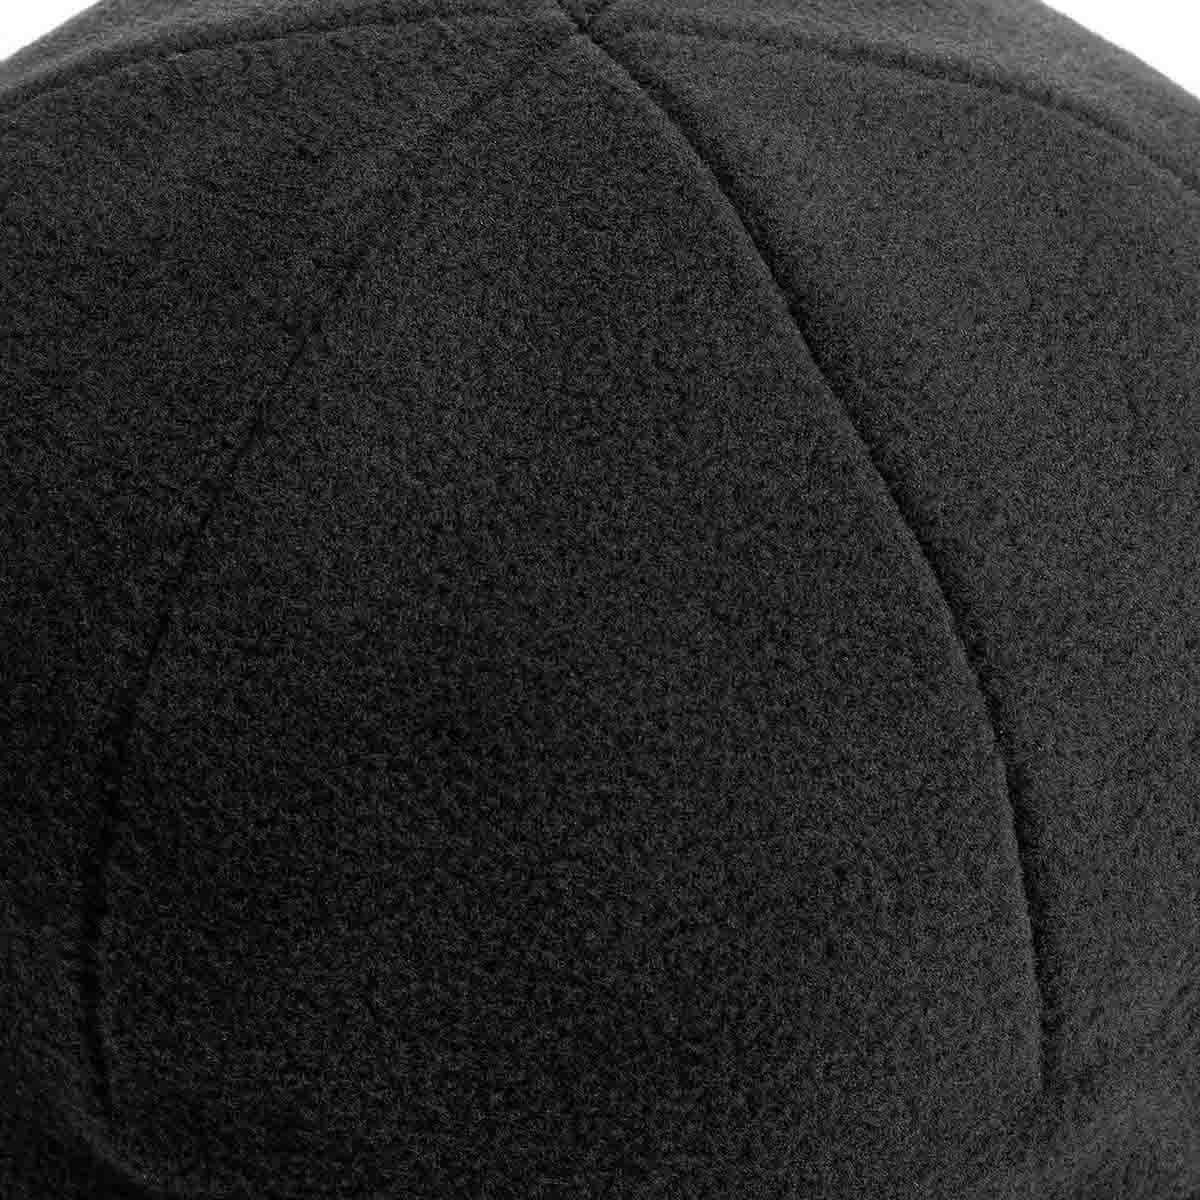 Legion Winter Fleece Hat for Cold Weather, One Layer